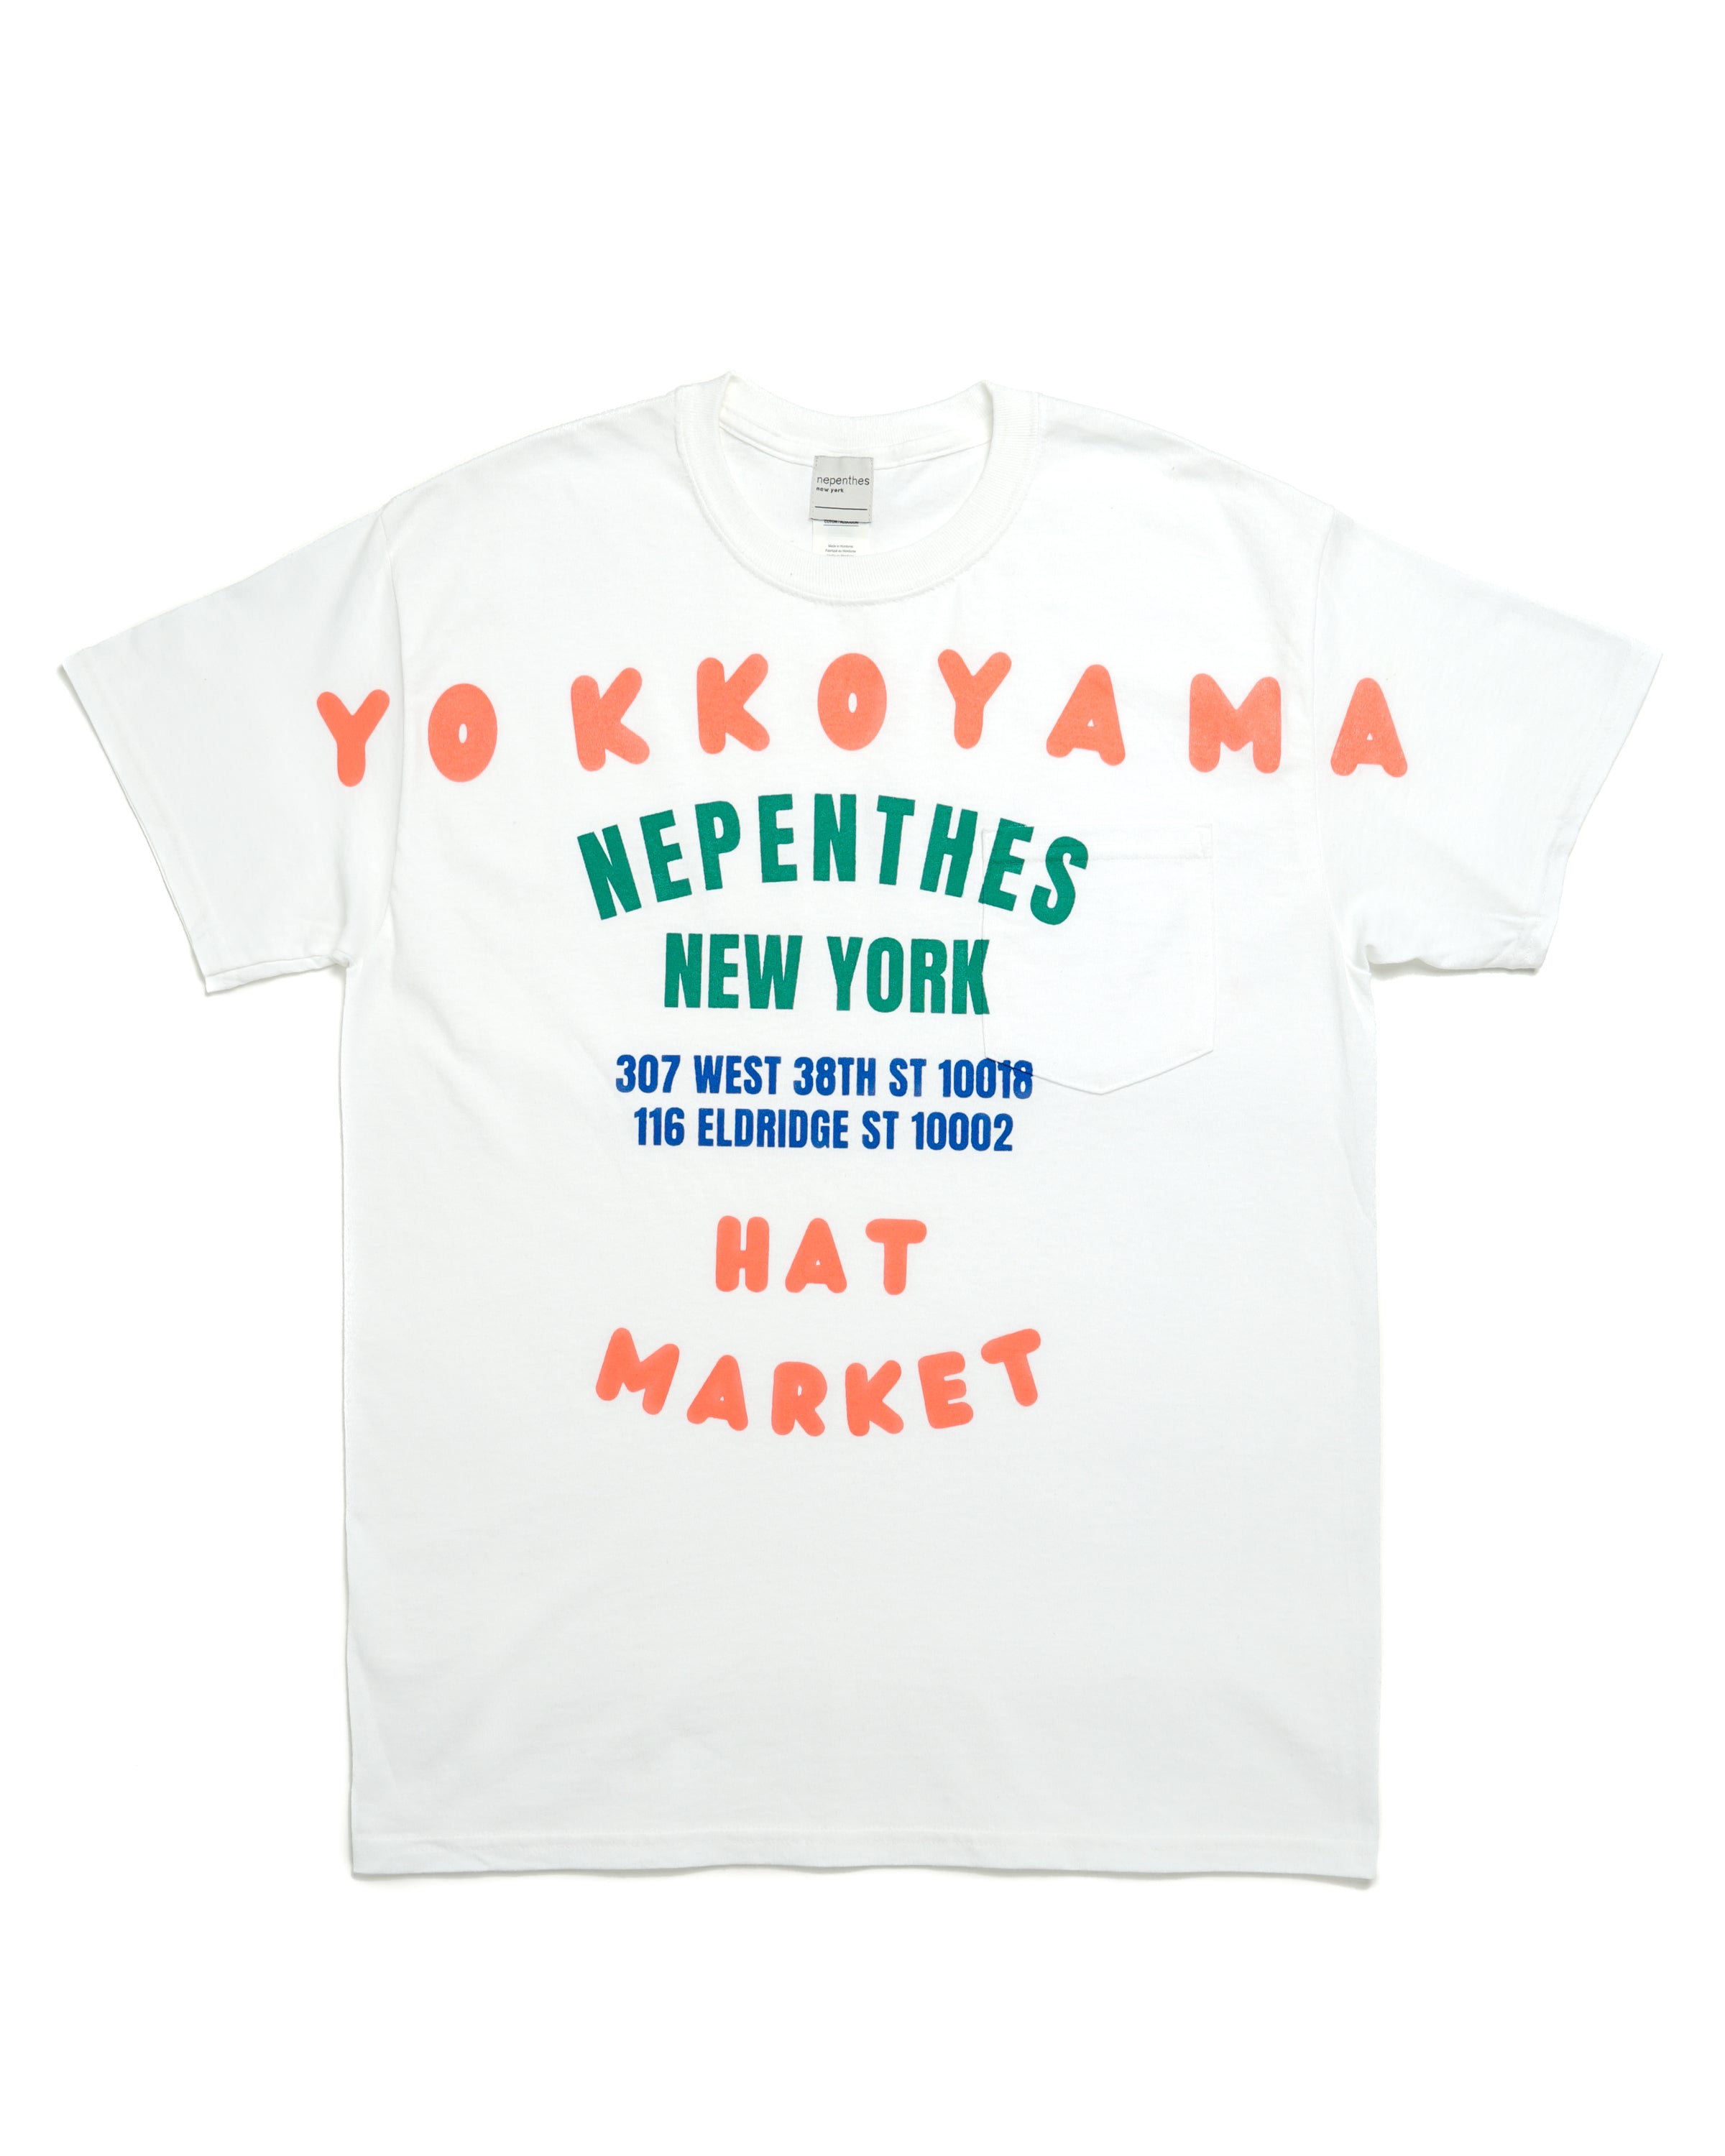 「SPECIAL RELEASE」NEPENTHES NEW YORK X YOKKOYAMA HAT MARKET - RELEASING JUNE 19TH